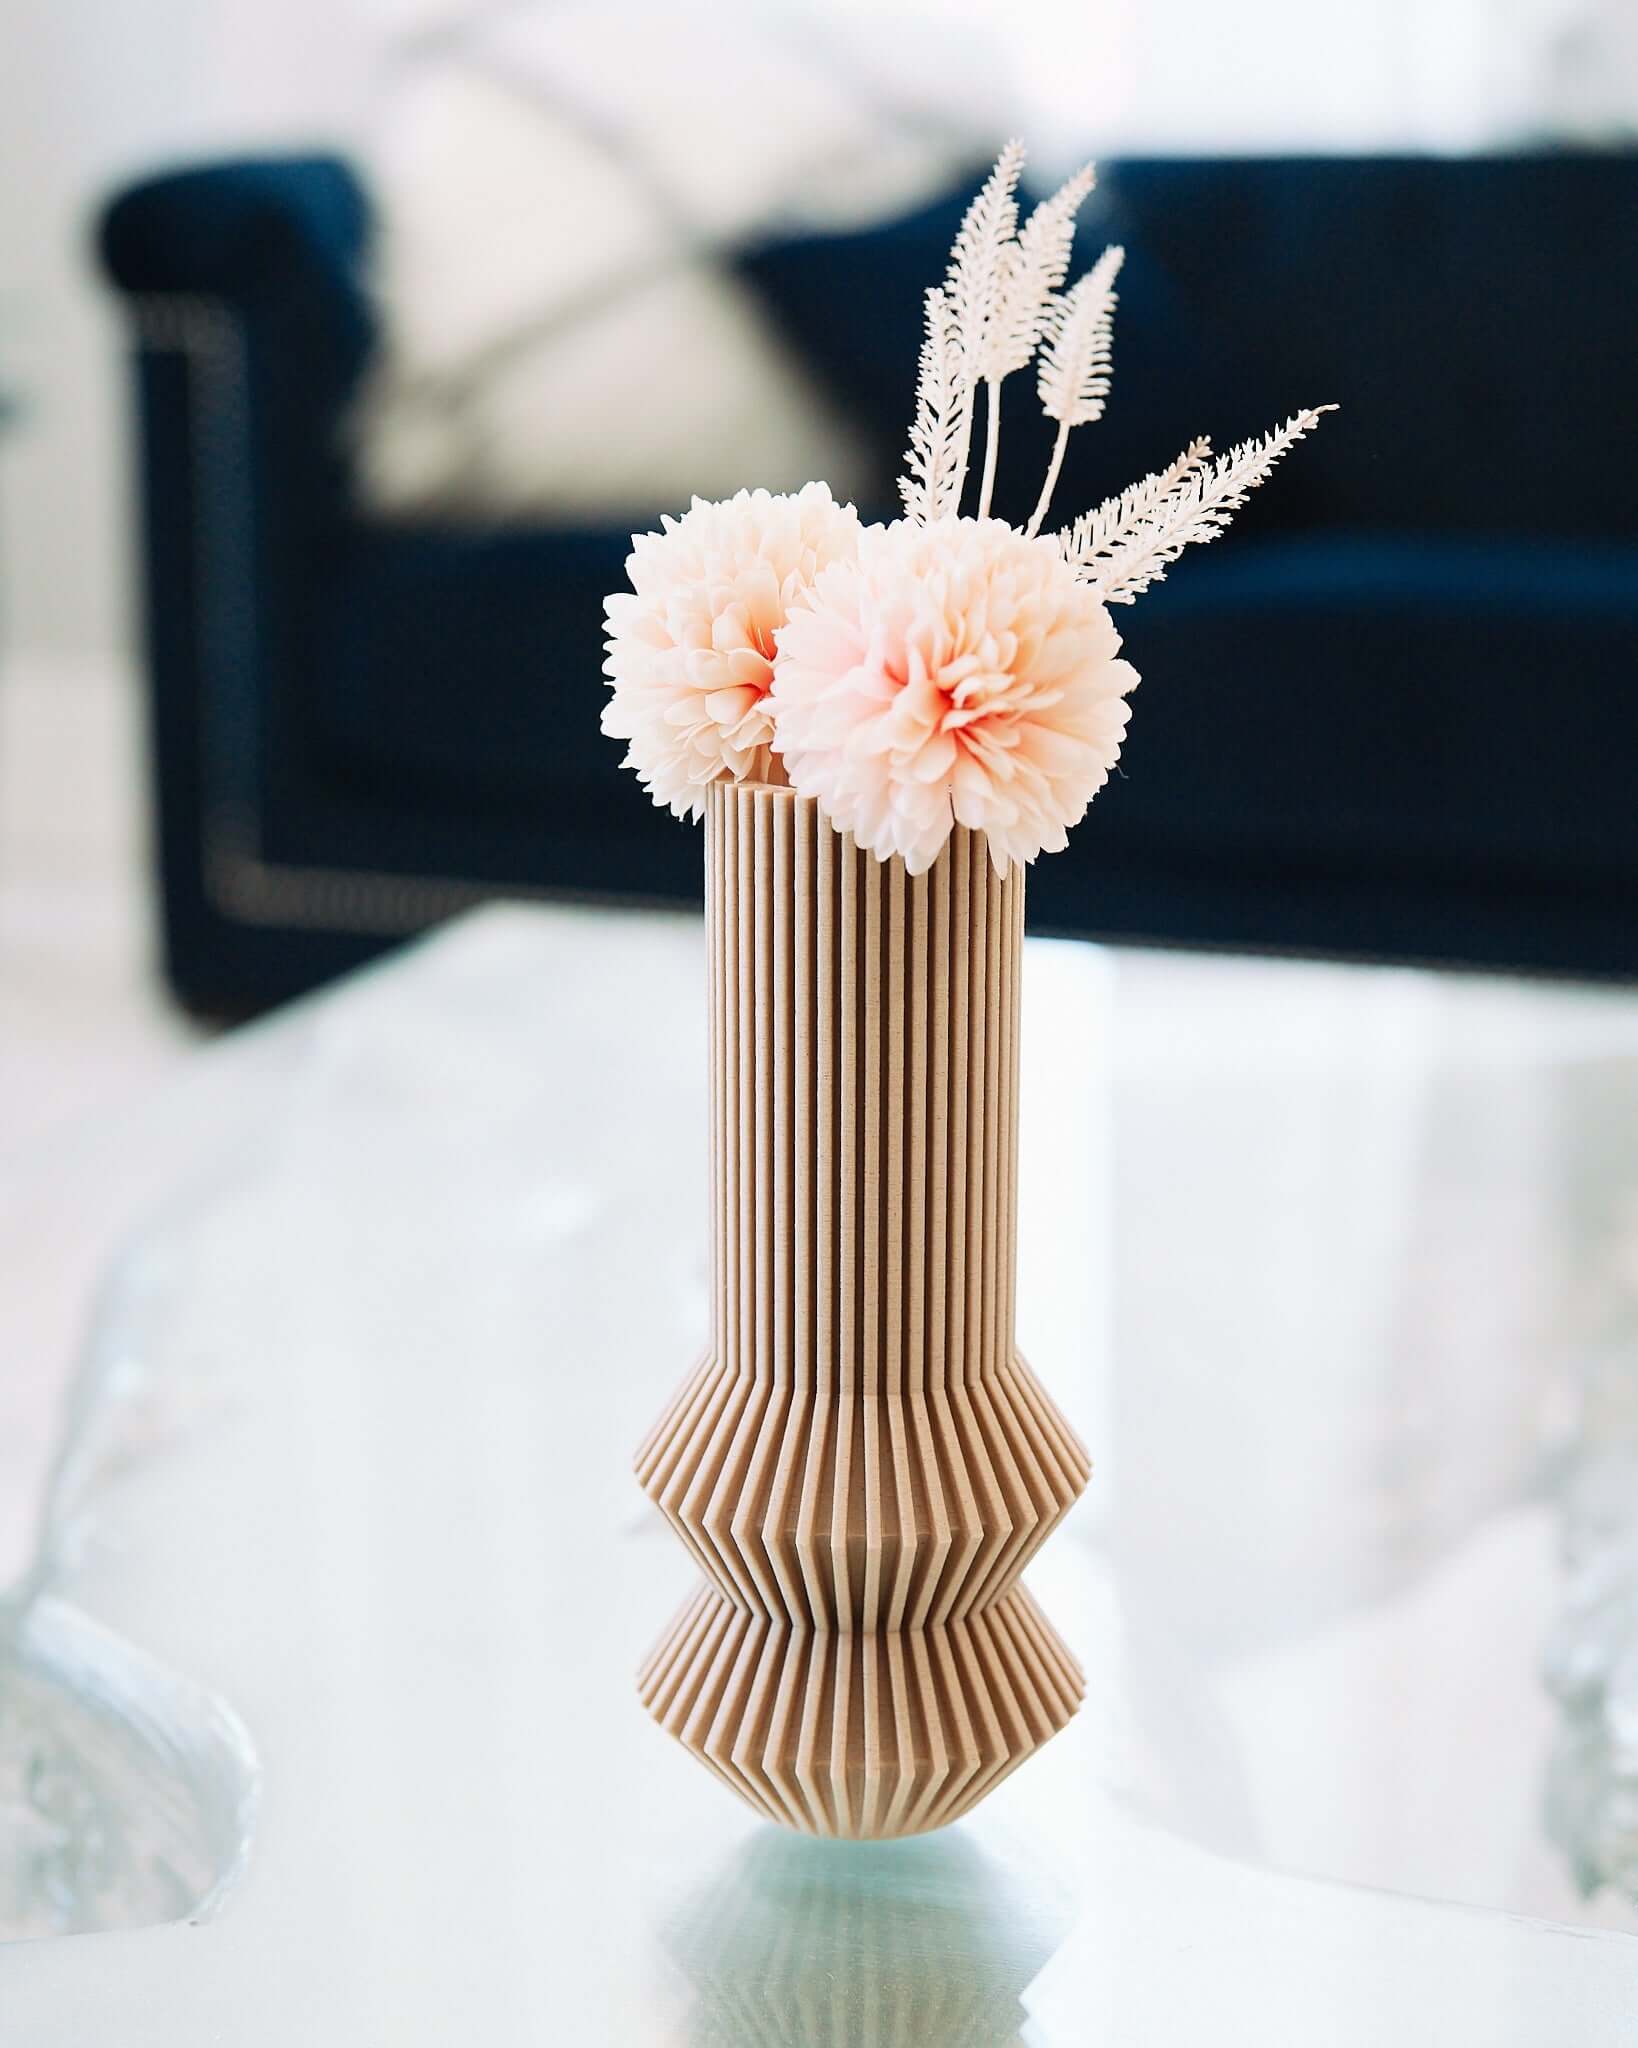 This is a cream color vase with pink flowers.